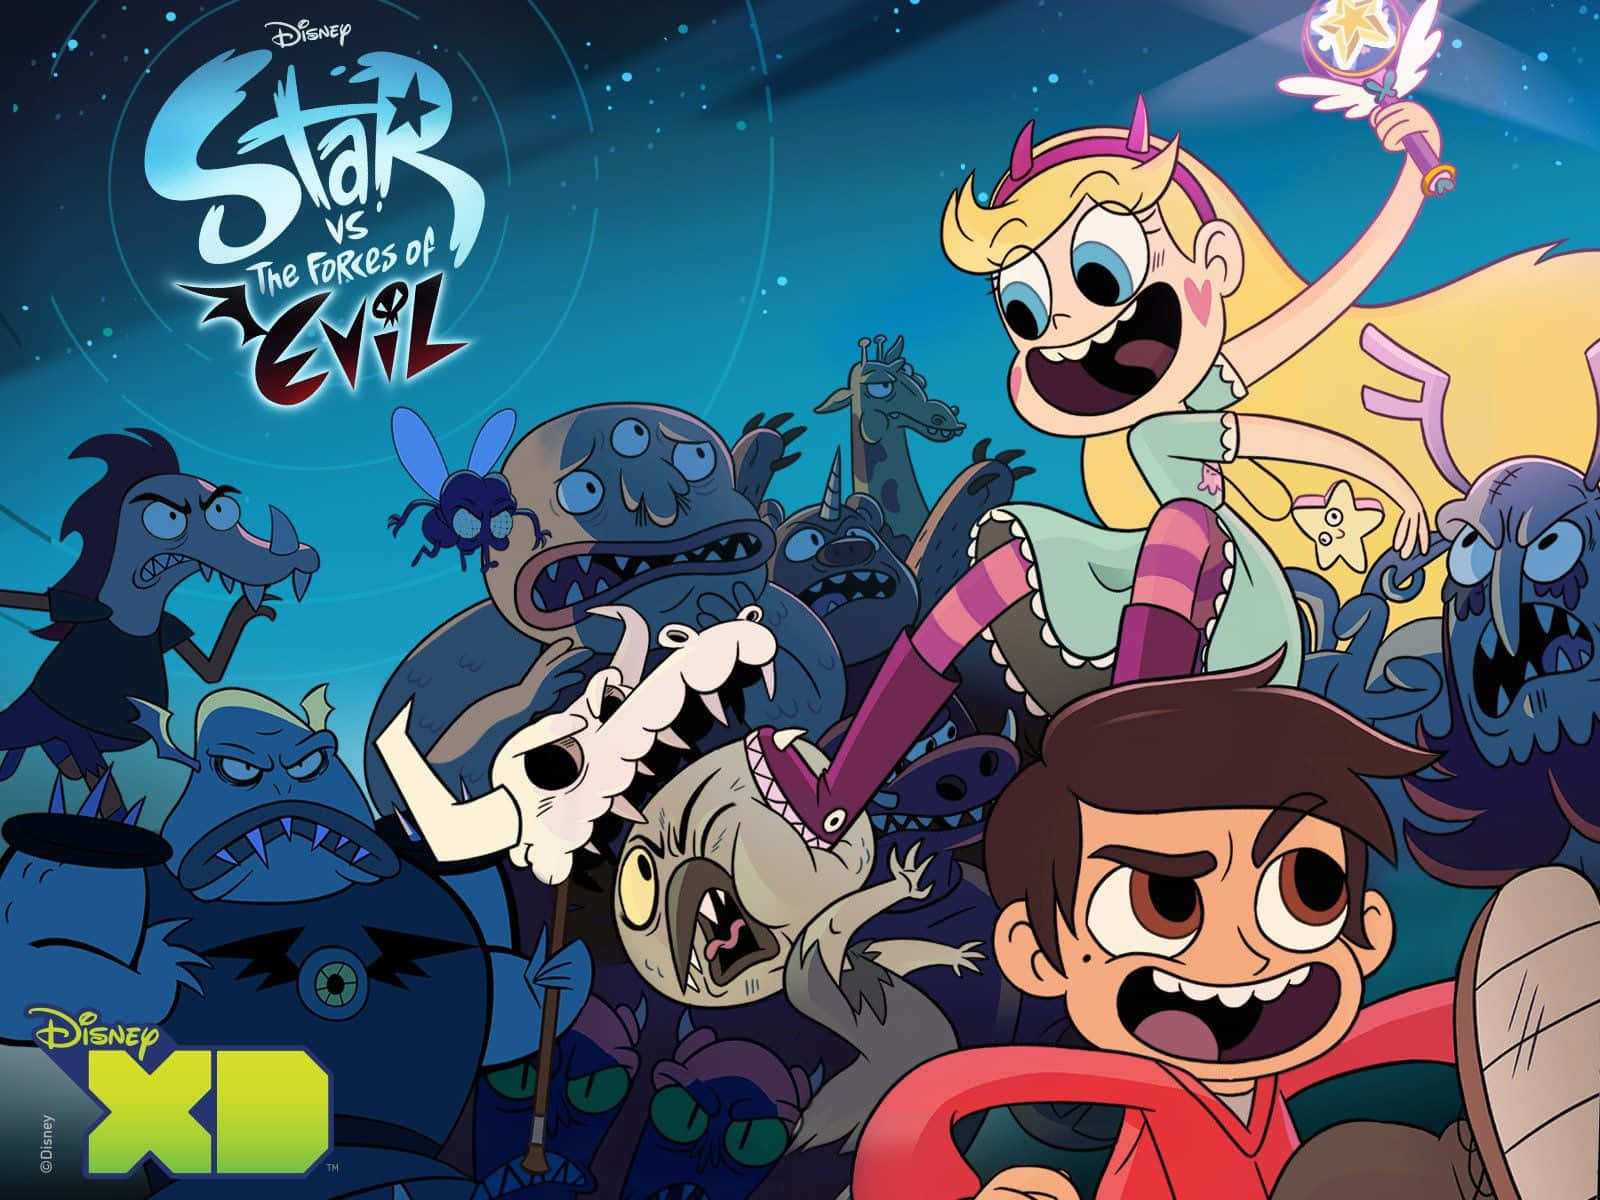 Star Butterfly and Marco Diaz in the magical dimension